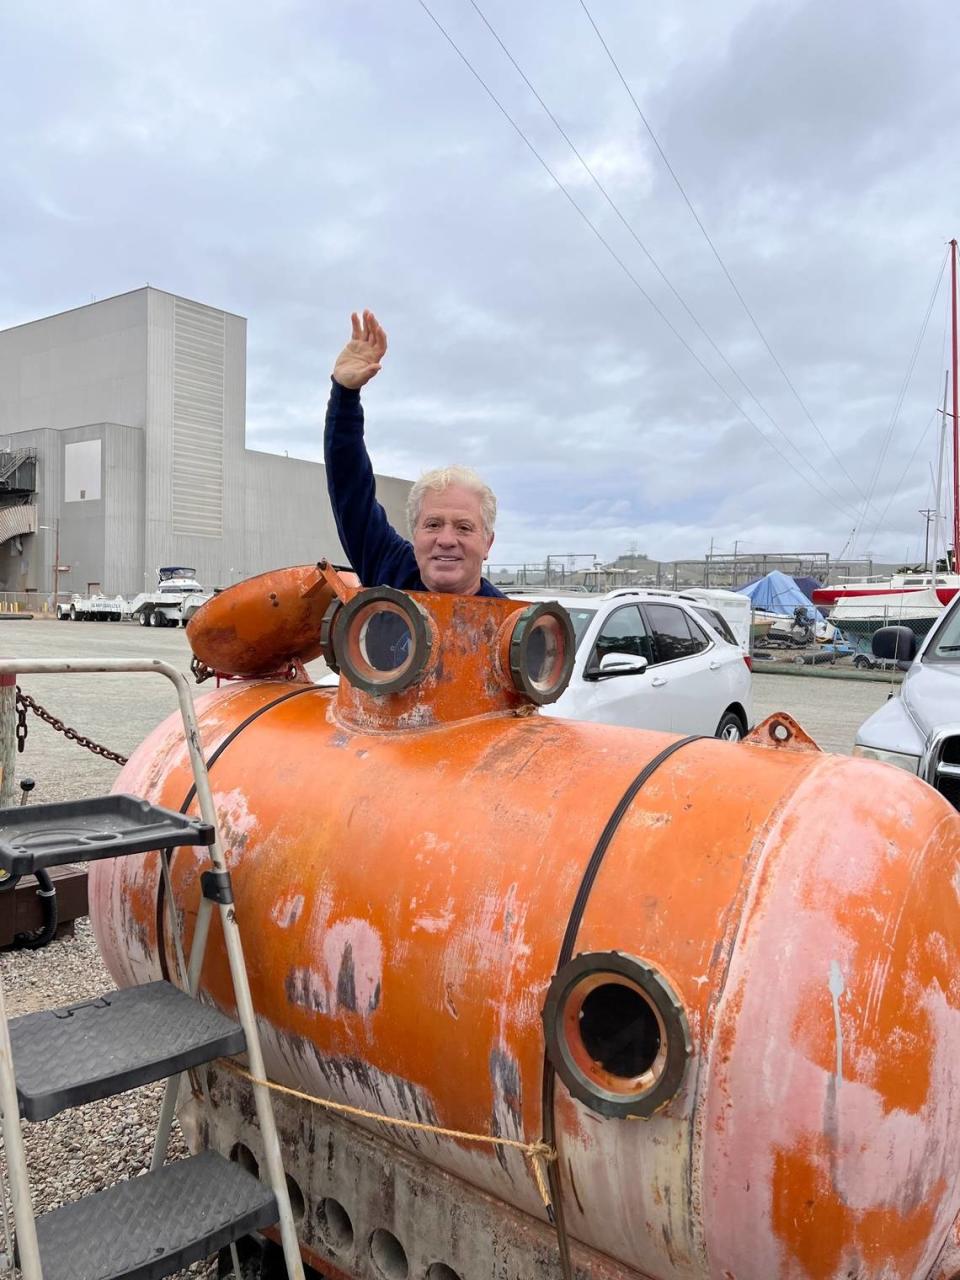 Bill Price of Cayucos pops out of a small sub during a visit to the Morro Bay Maritime Museum in March 2020.